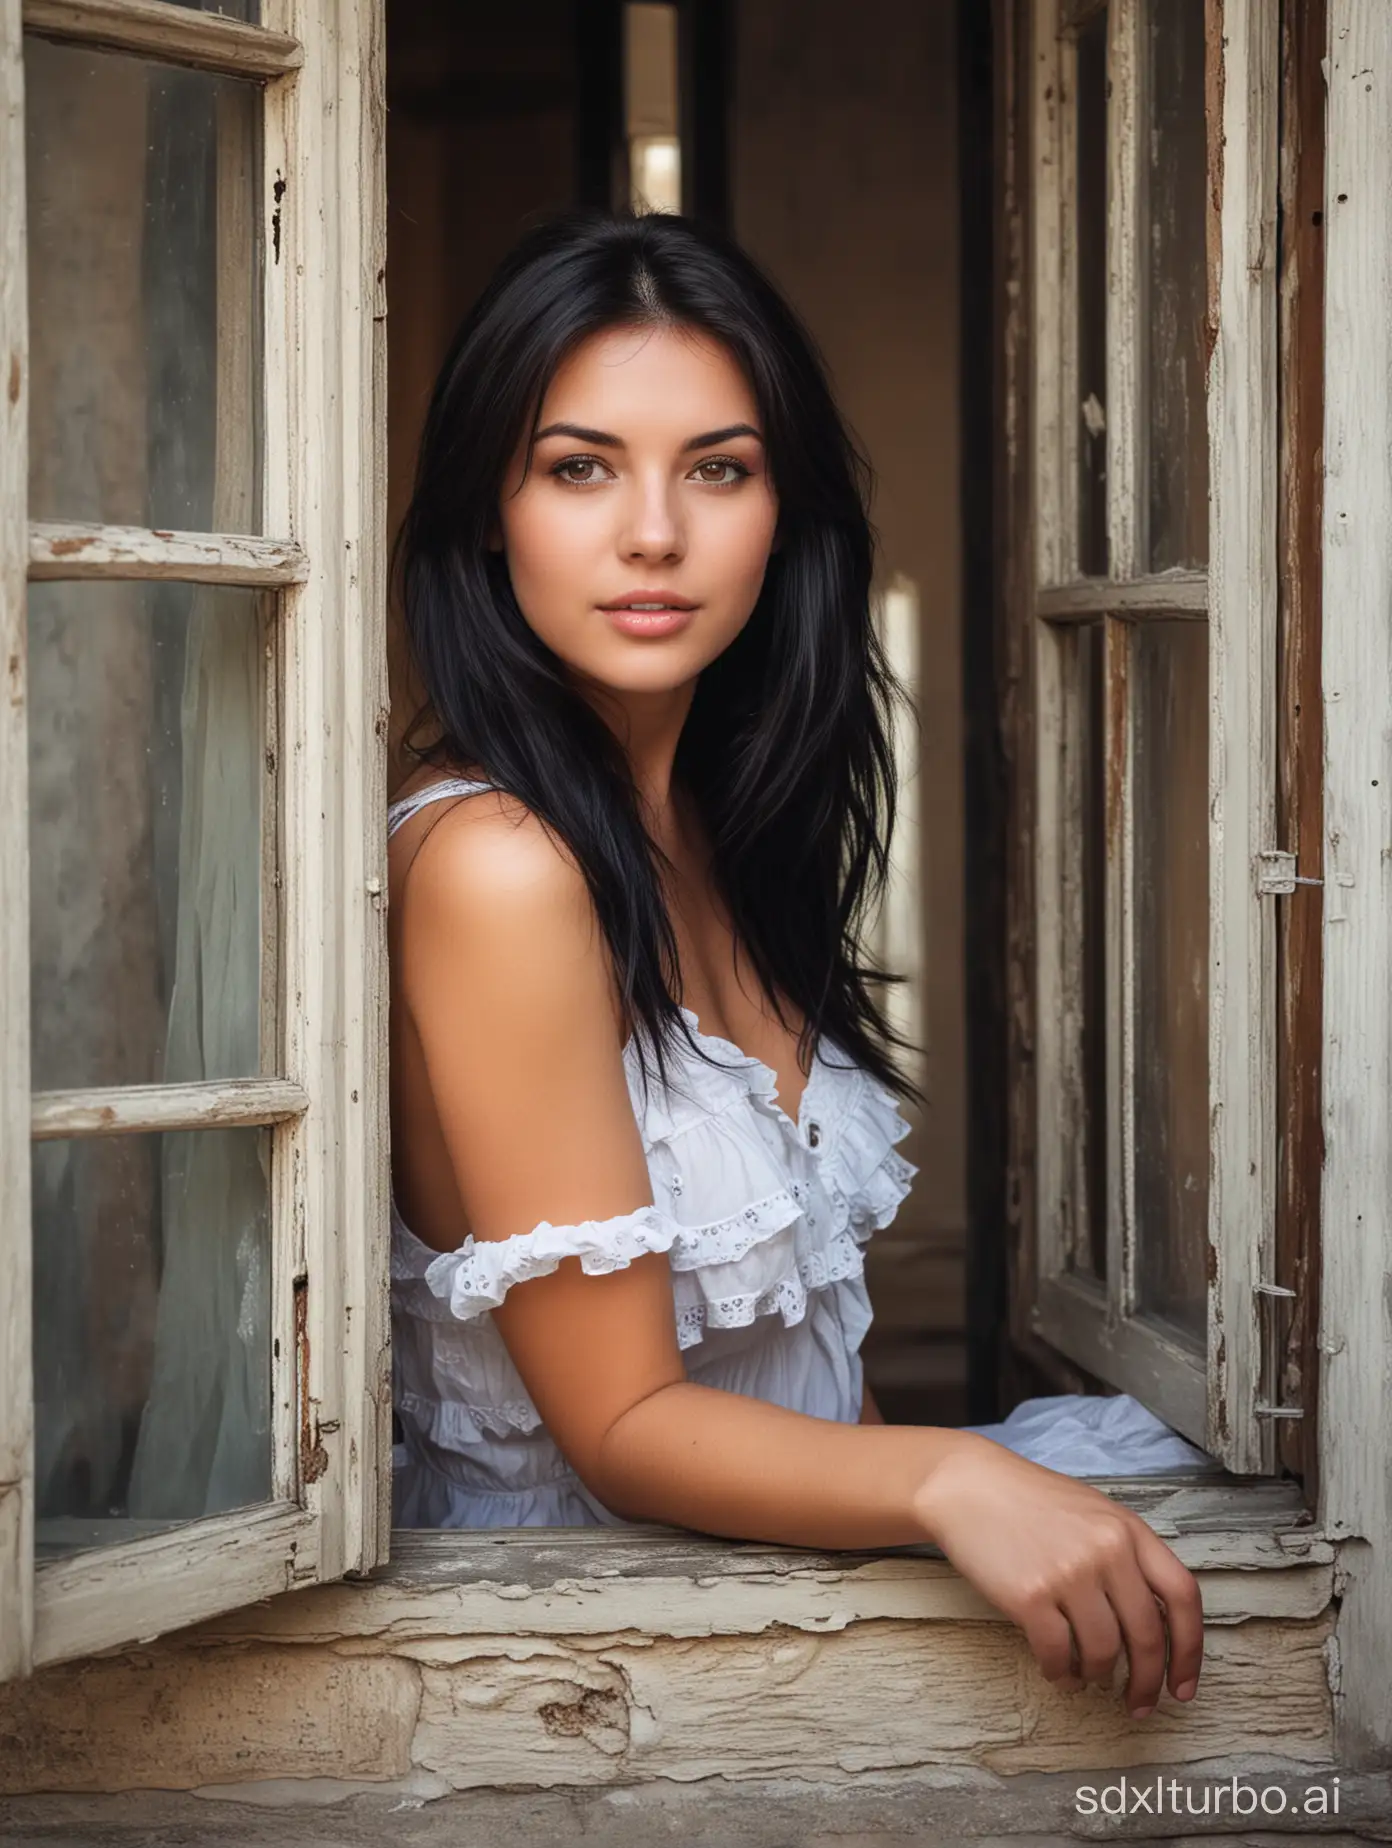 Pretty girl with dark hair inside the old house sitting on the window bottomless